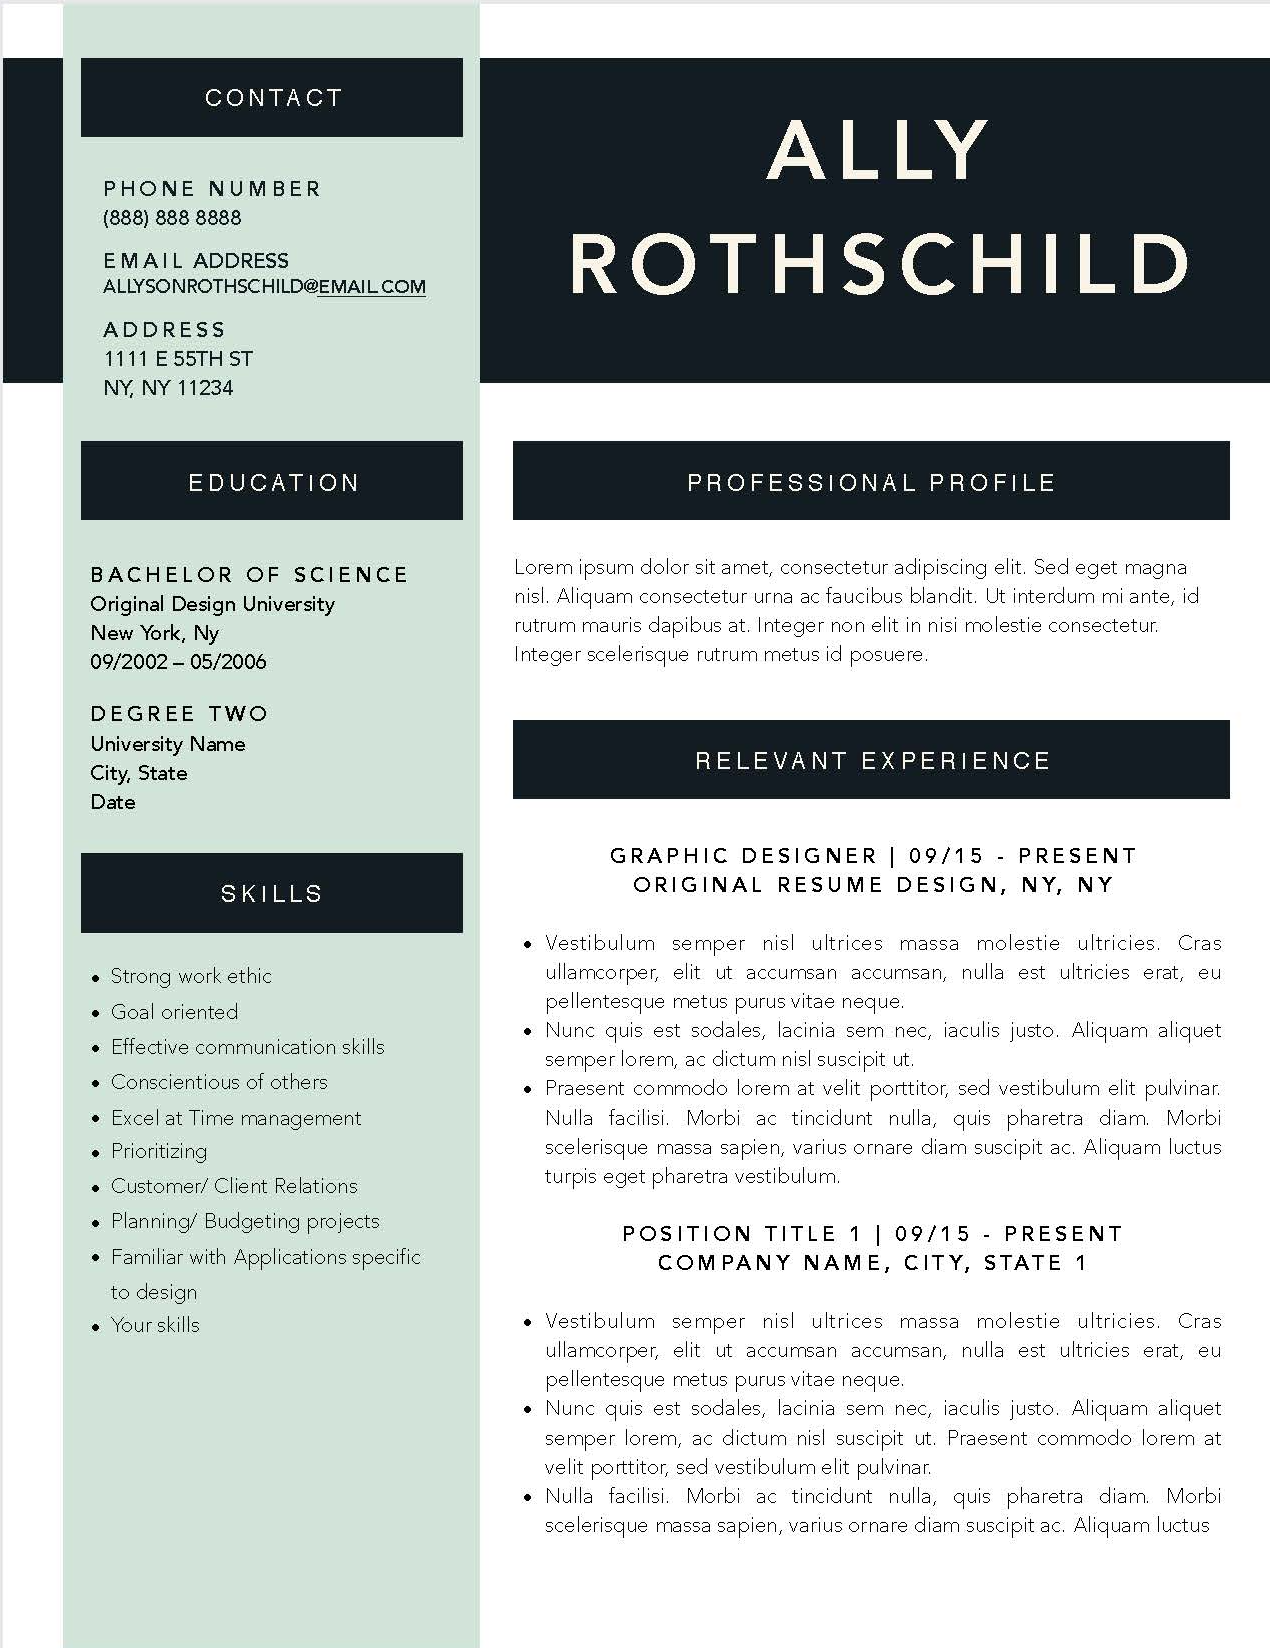 Ally Rothschild - Downloadable Resume Template and Cover Letter Template for Microsoft Word and Apple Pages